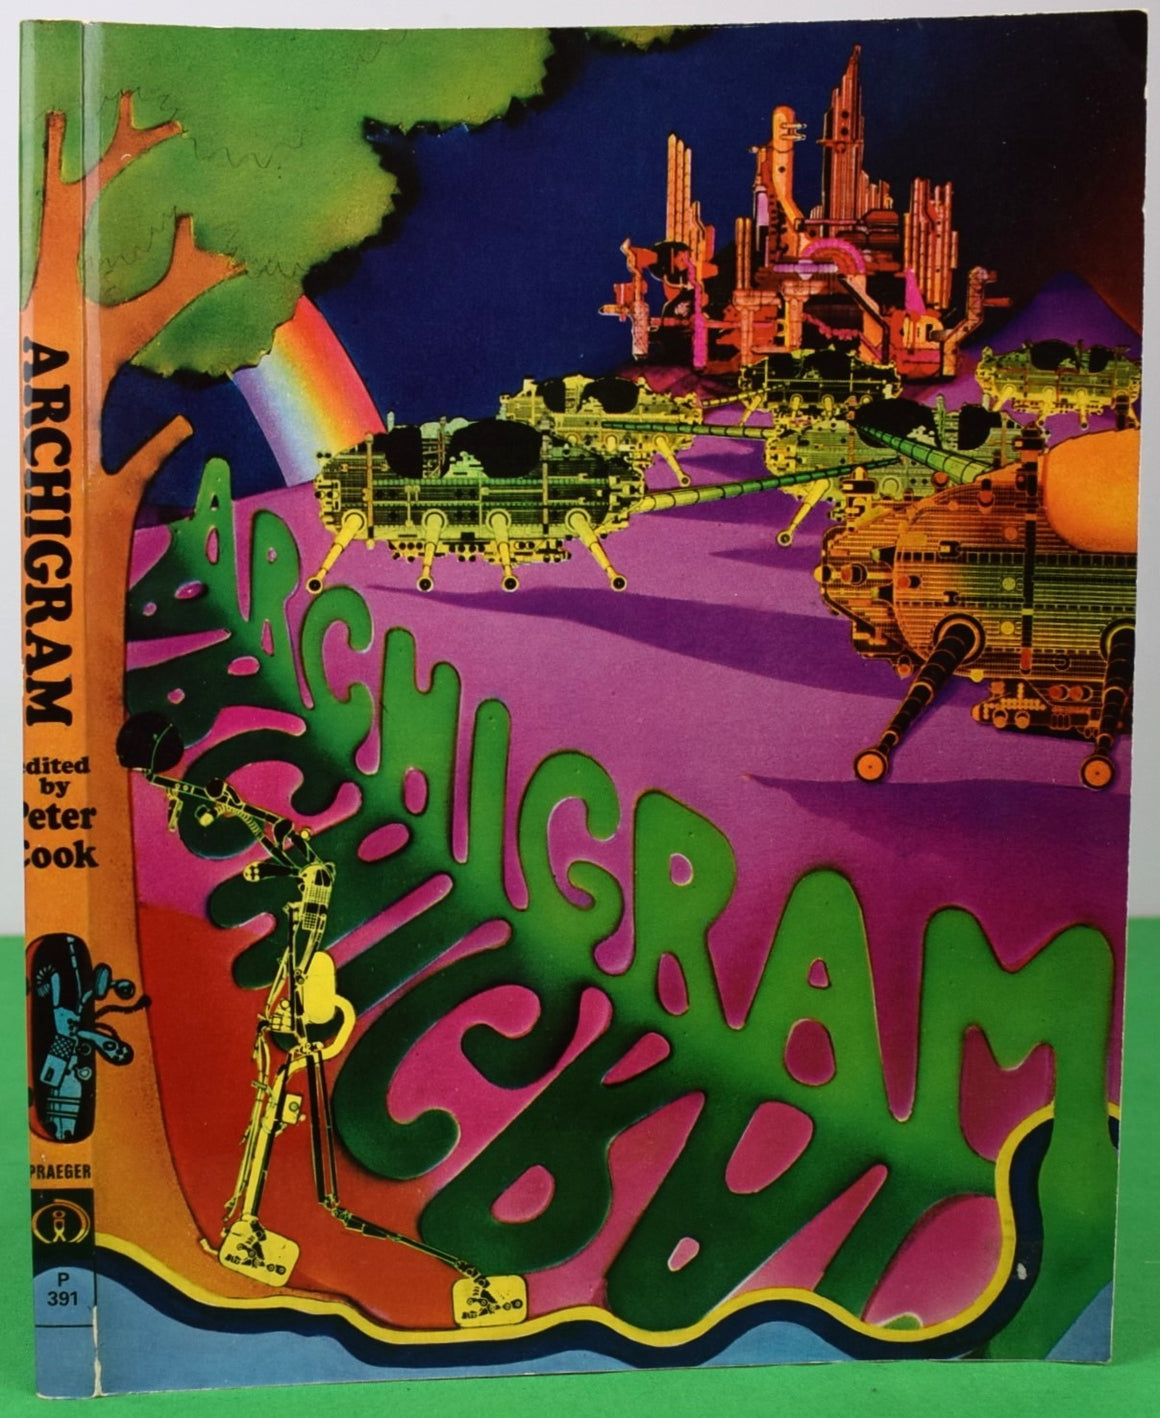 "Archigram" 1973 COOK, Peter [edited by]